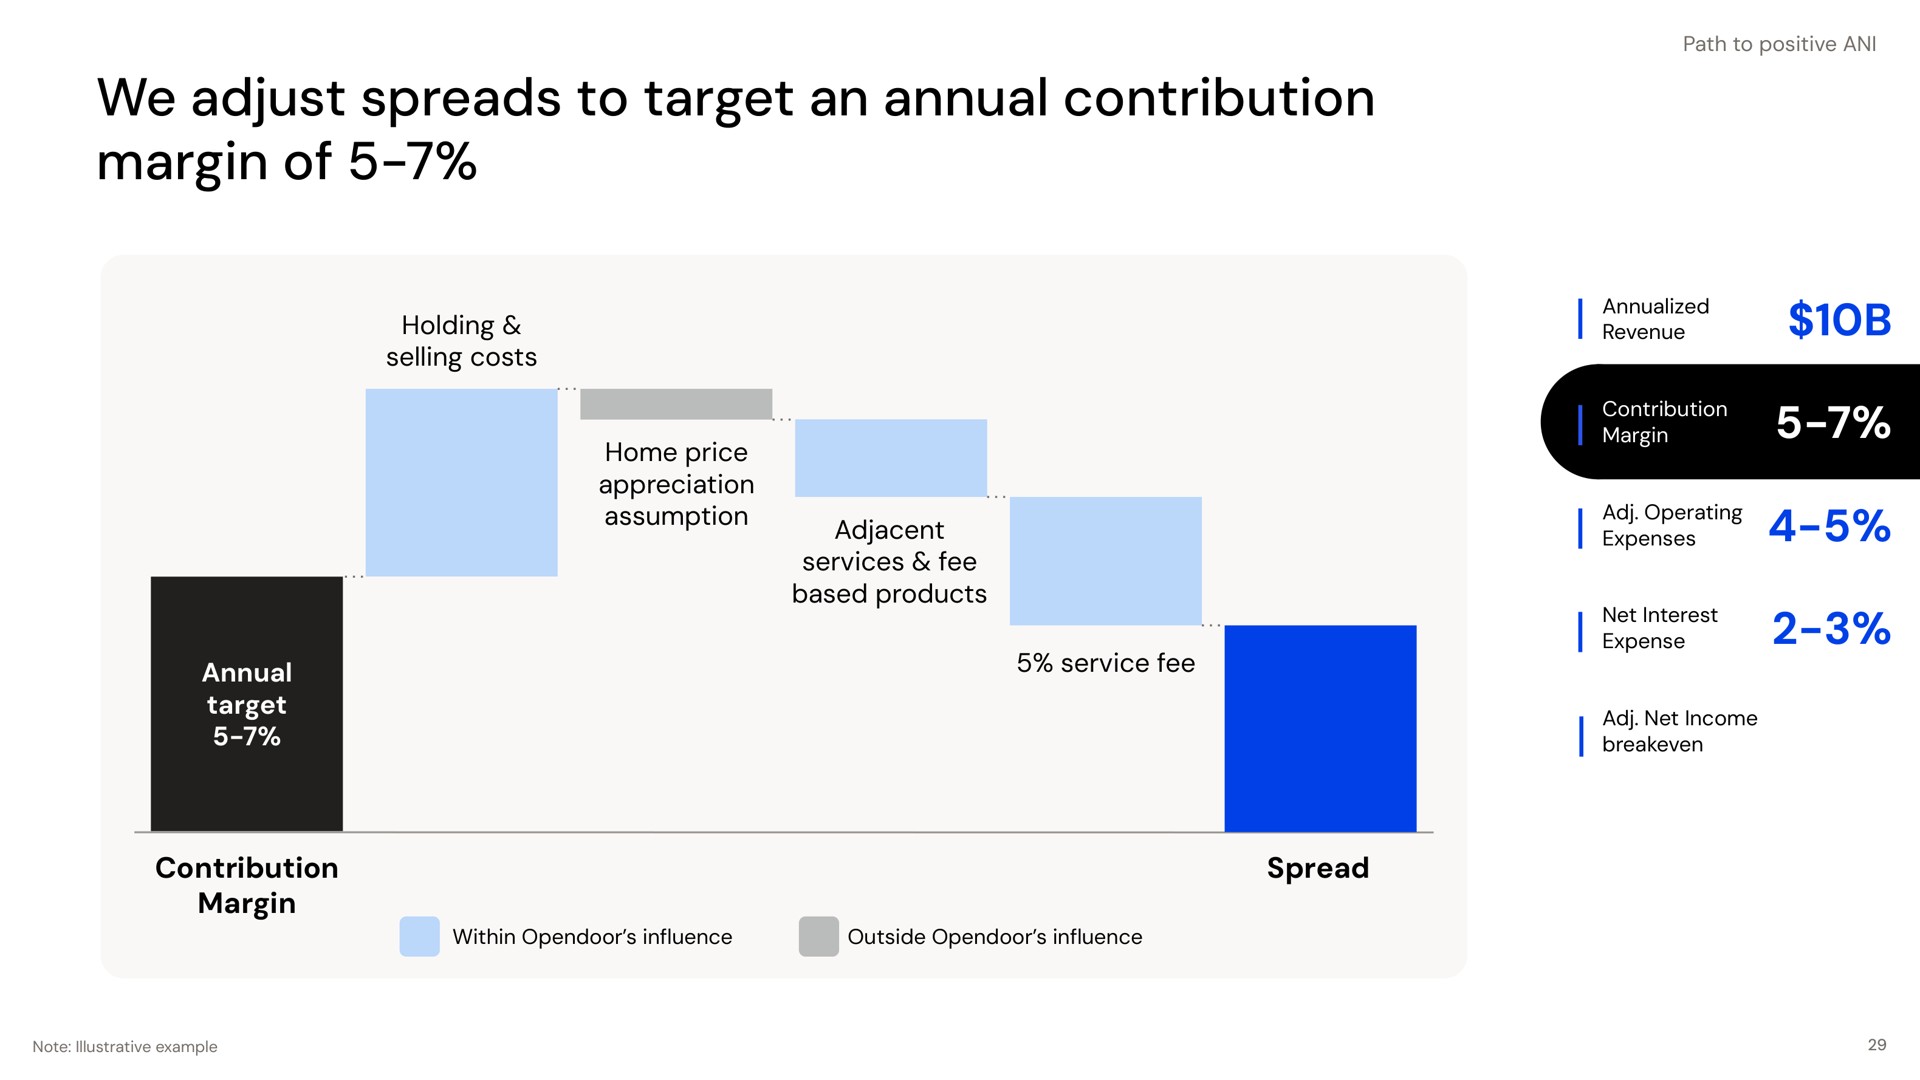 we adjust spreads to target an annual contribution margin of holding selling costs home price appreciation assumption adjacent services fee based products service fee spread annual target contribution margin teel | Opendoor